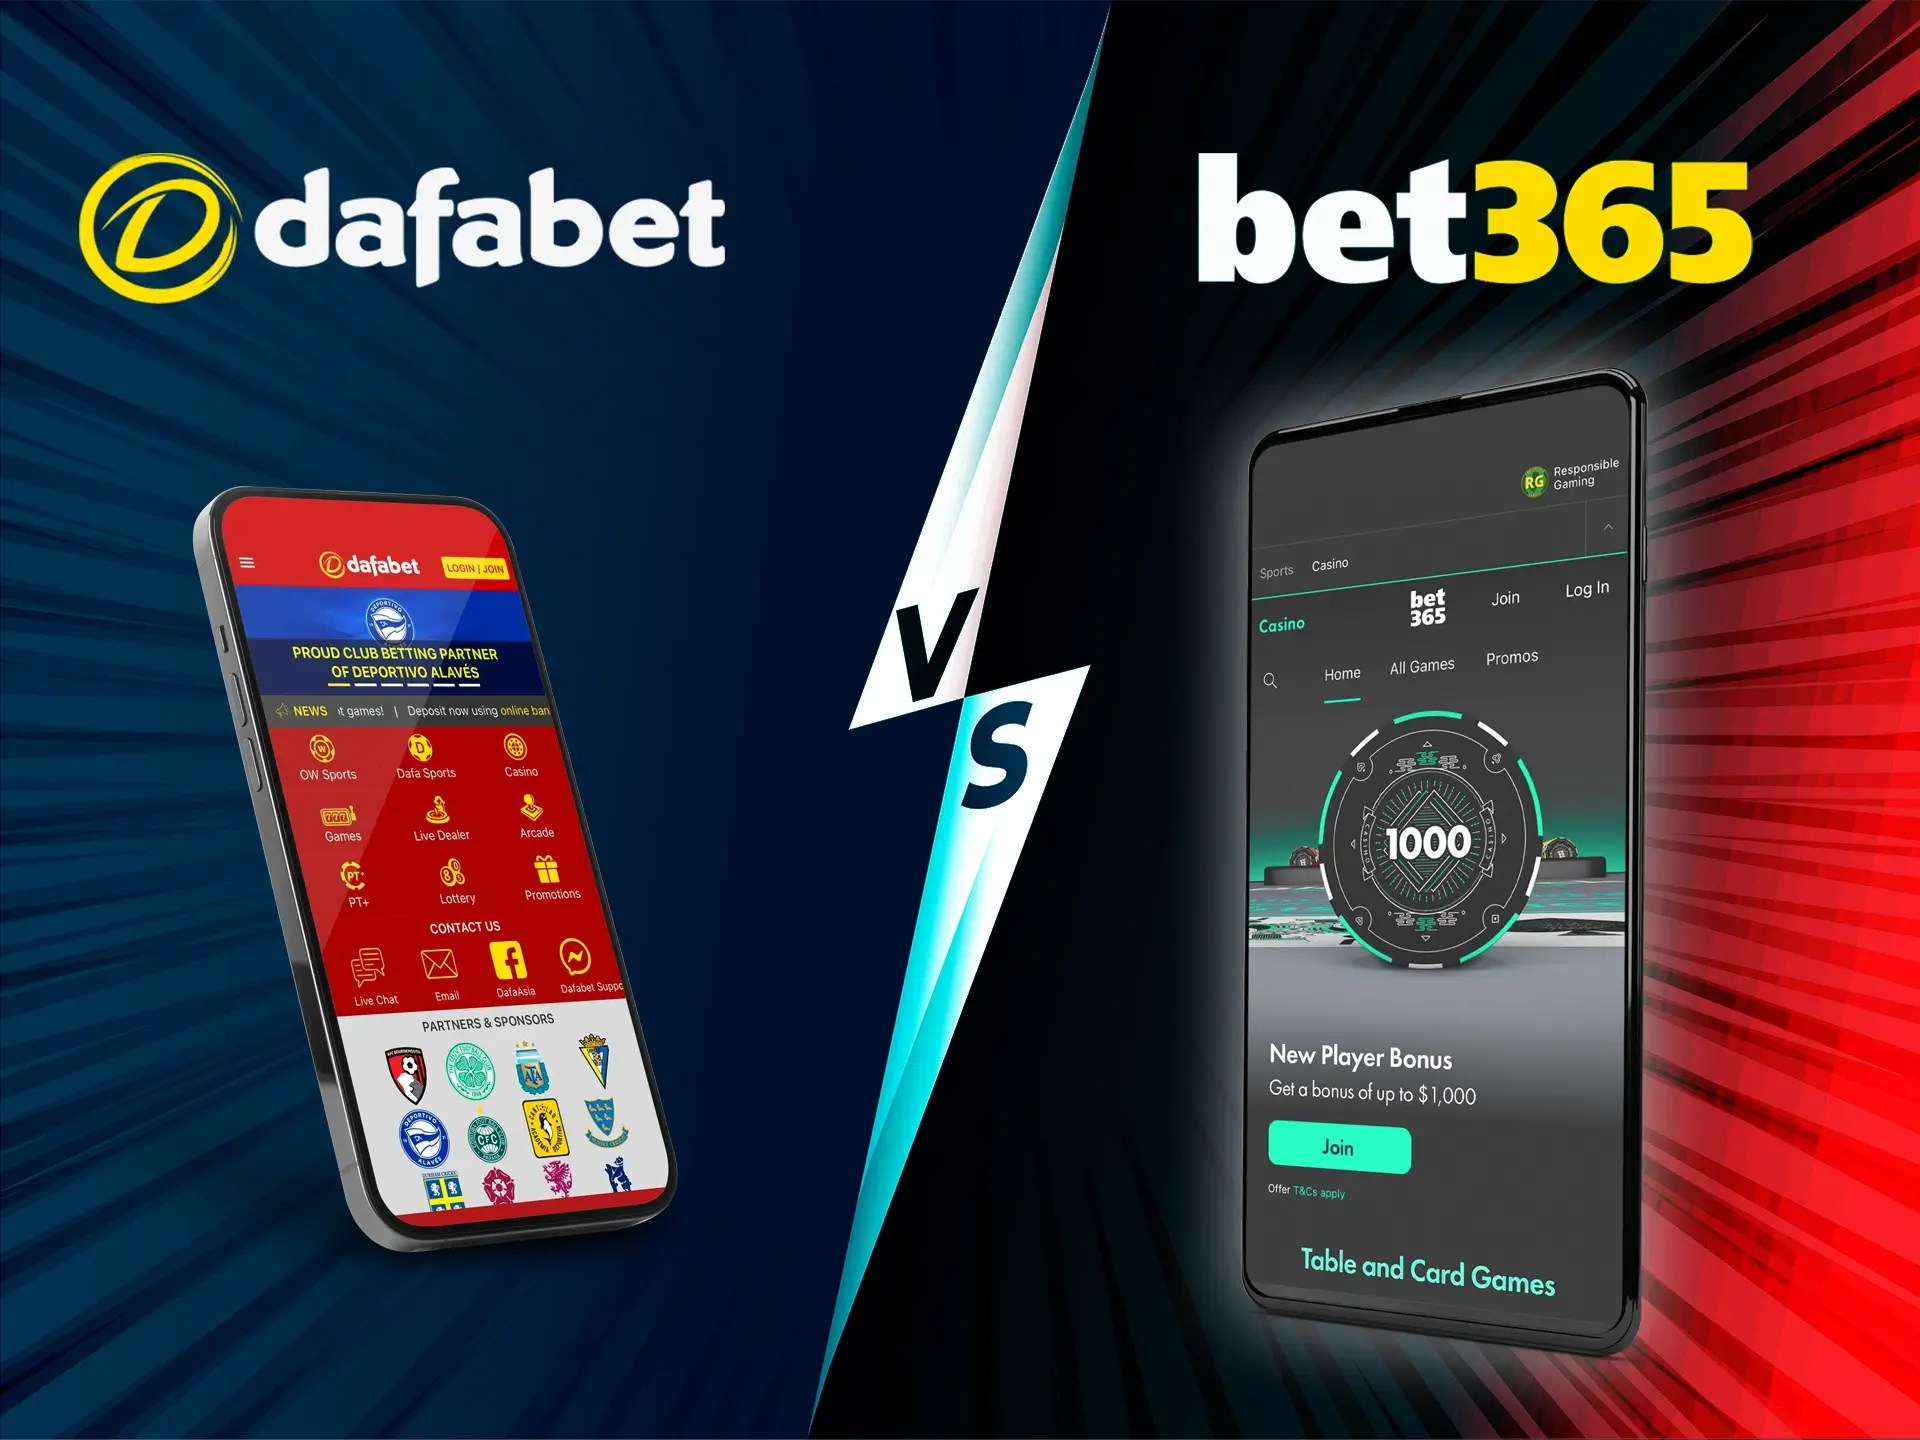 Try out the convenience of the Dafabet and Bet365 mobile app.